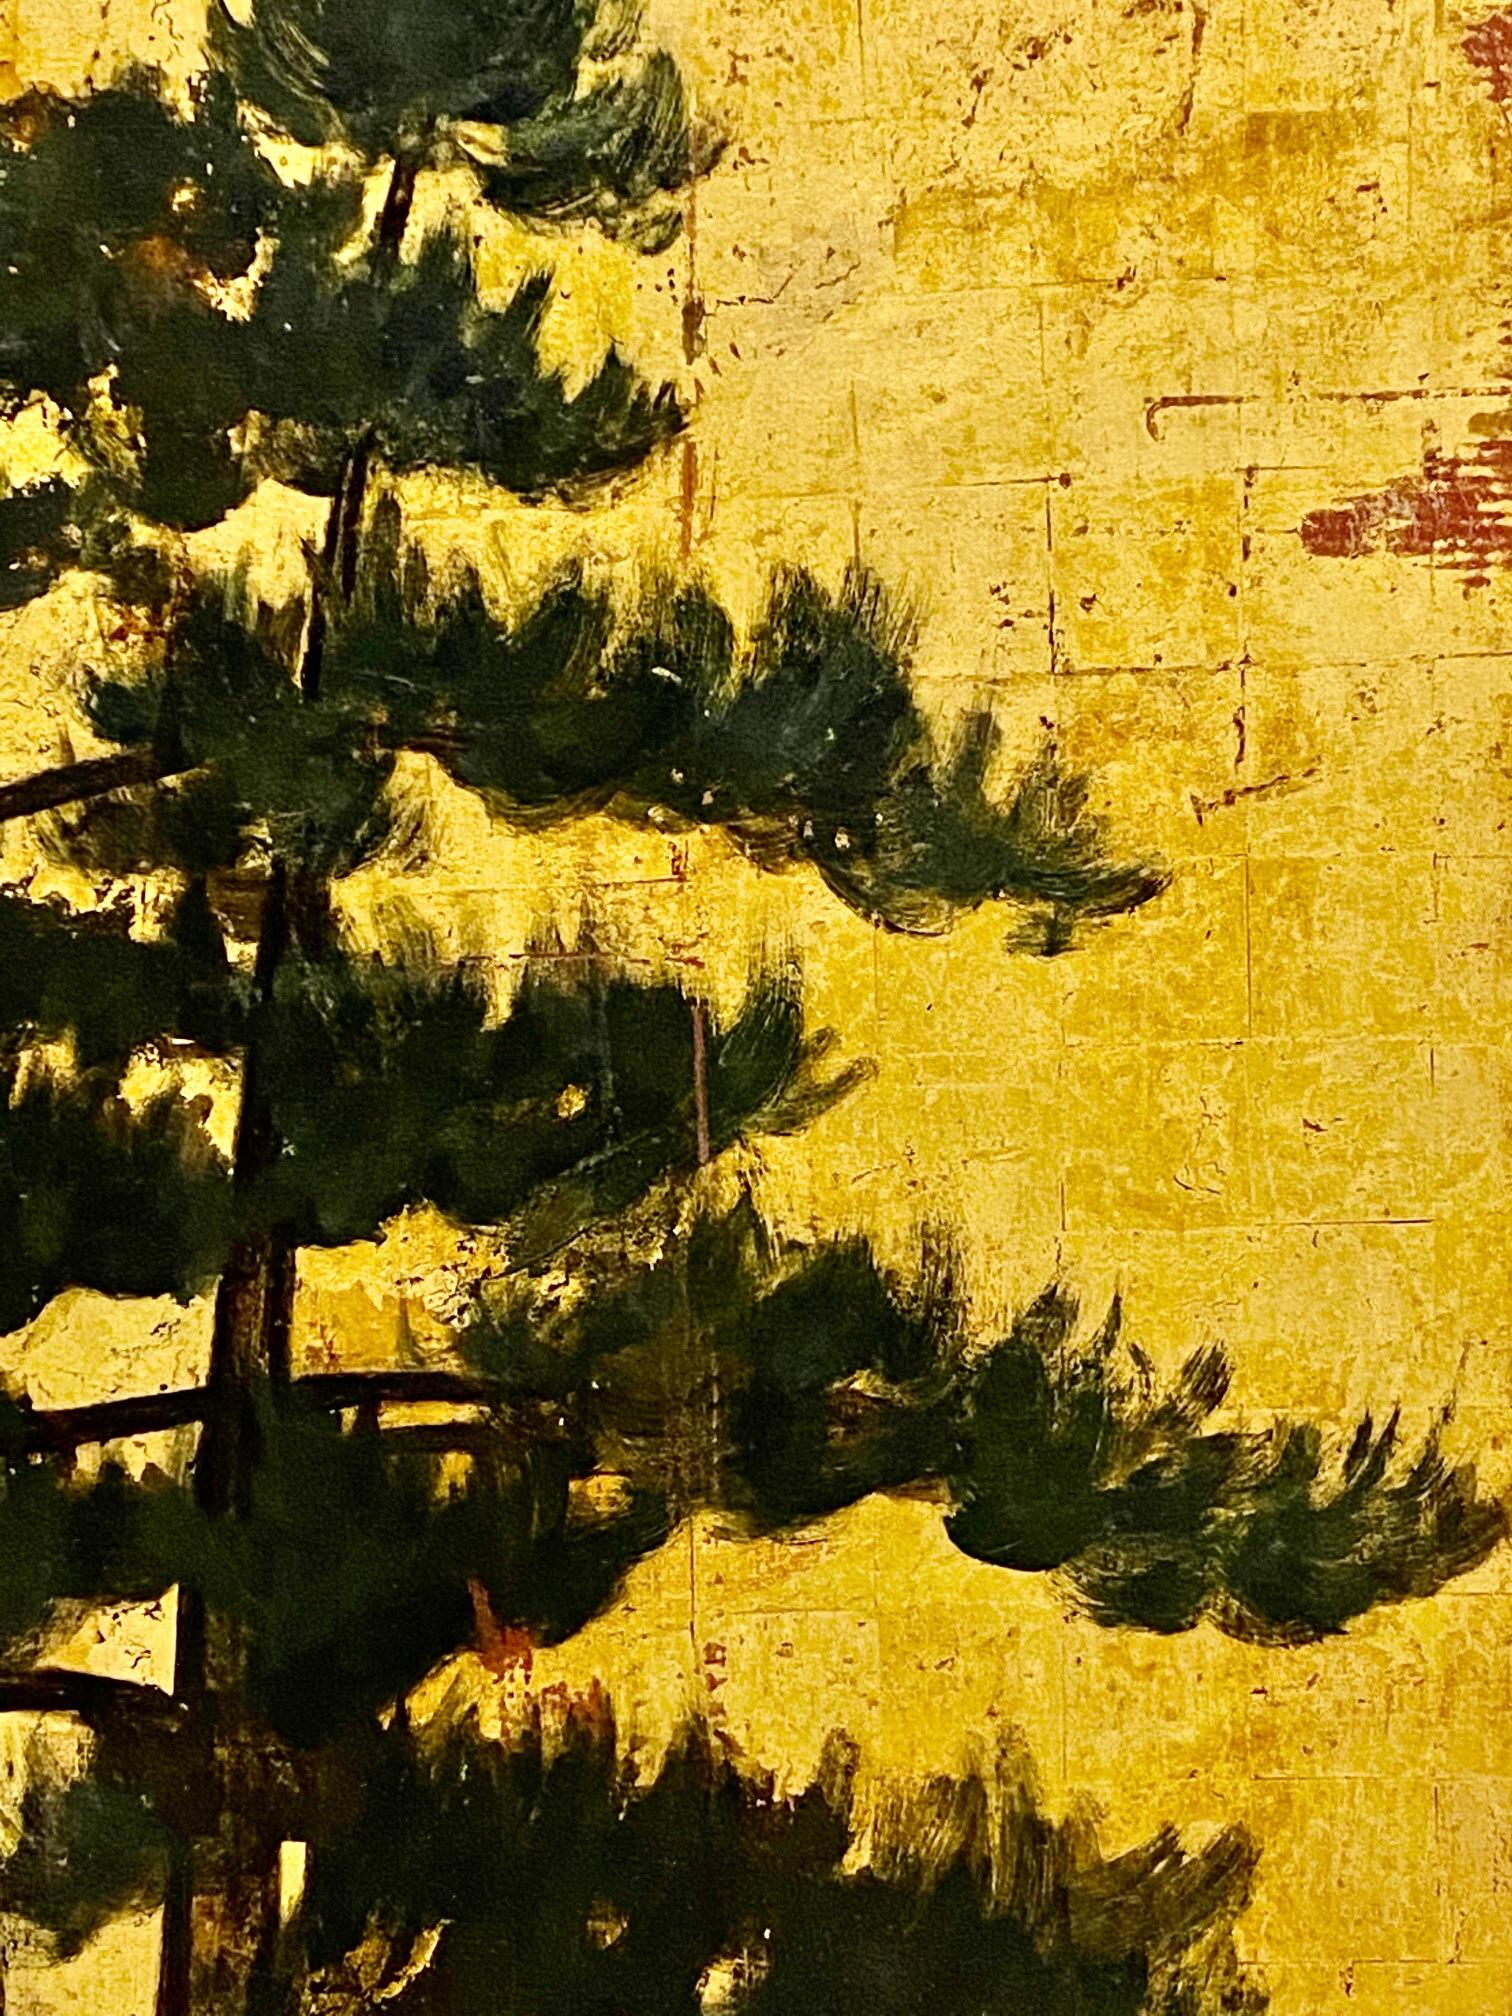 Exceptional Large 19th Century Triptych of Pine Trees Against Gold Leaf Sky 4